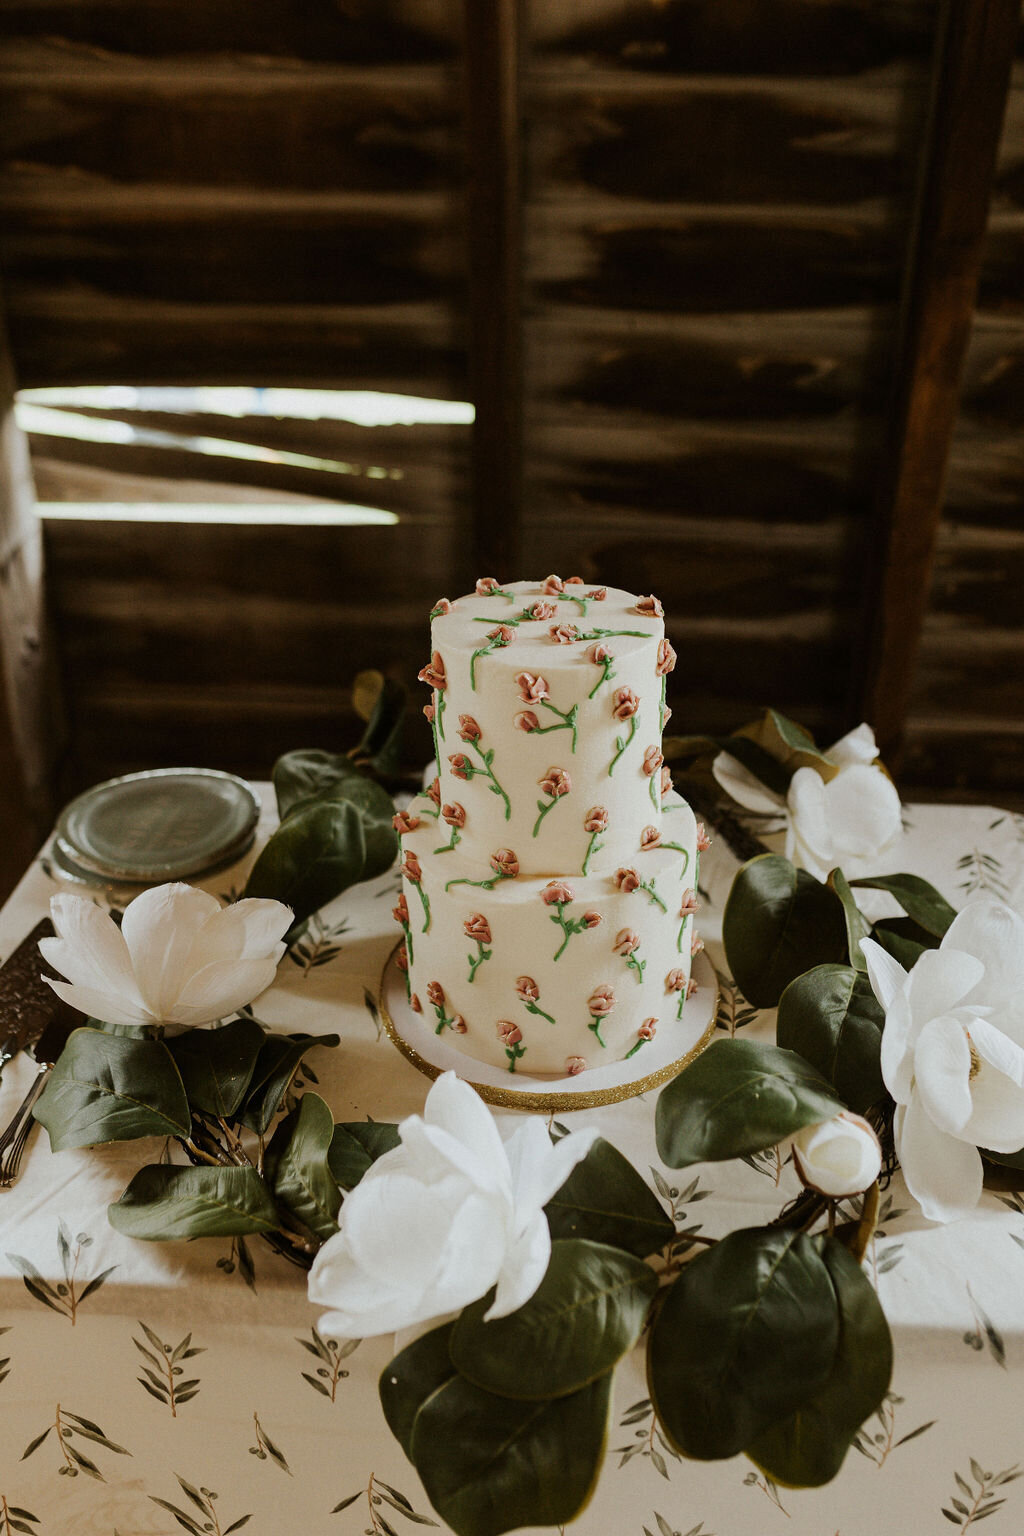 White wedding cake with pink and green frosting flowers sitting on a table surrounded by white flowers and greenery